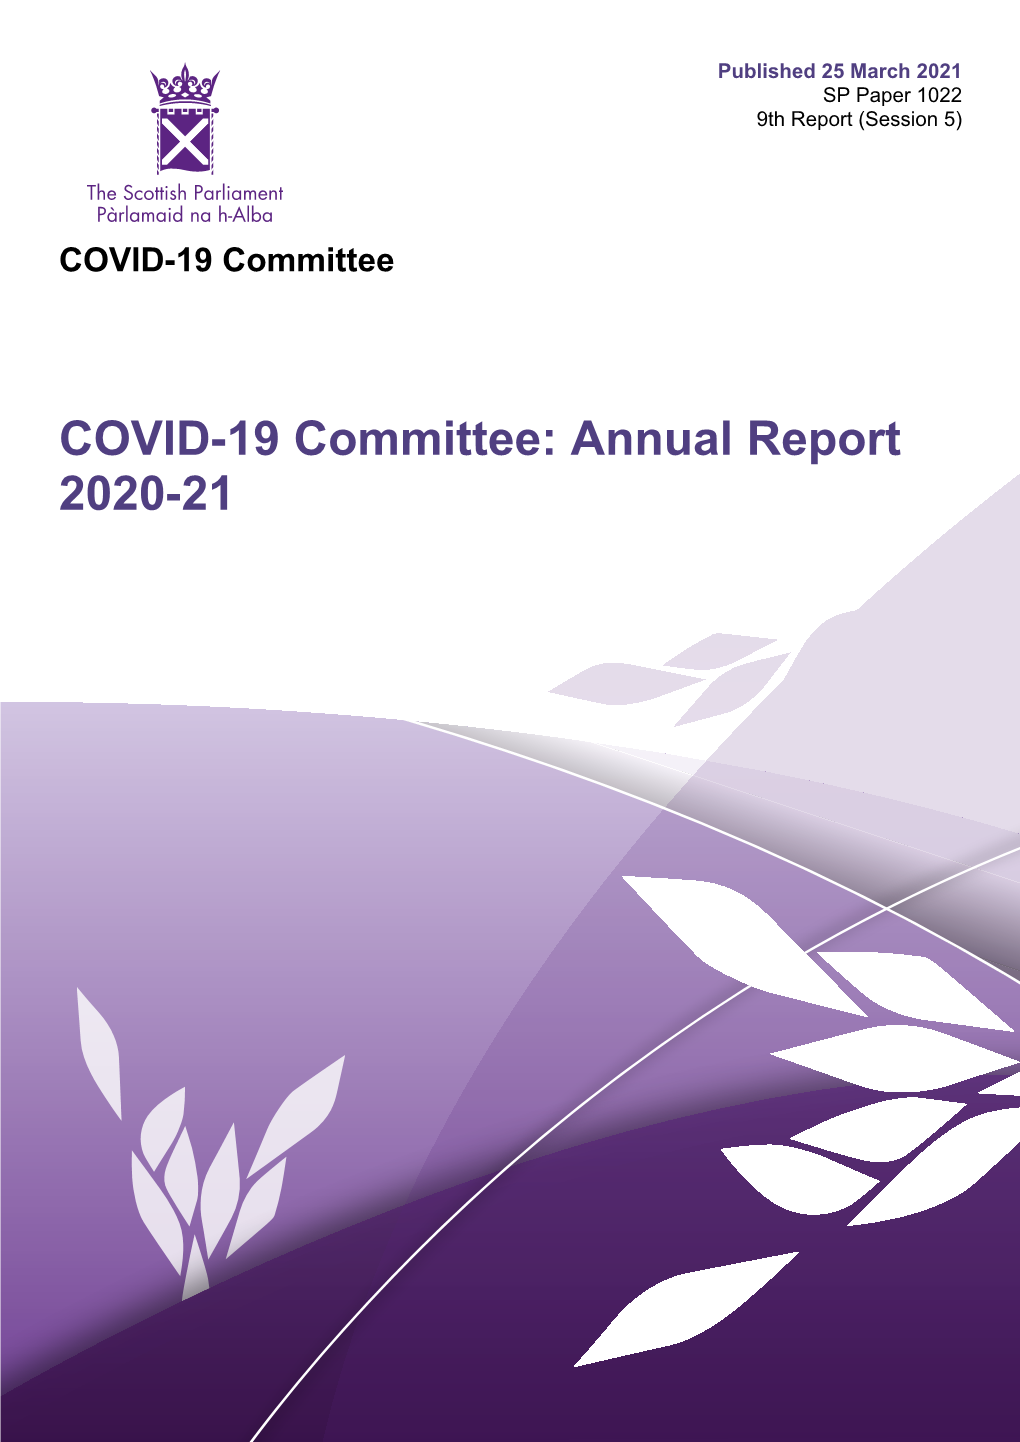 COVID-19 Committee: Annual Report 2020-21 Published in Scotland by the Scottish Parliamentary Corporate Body